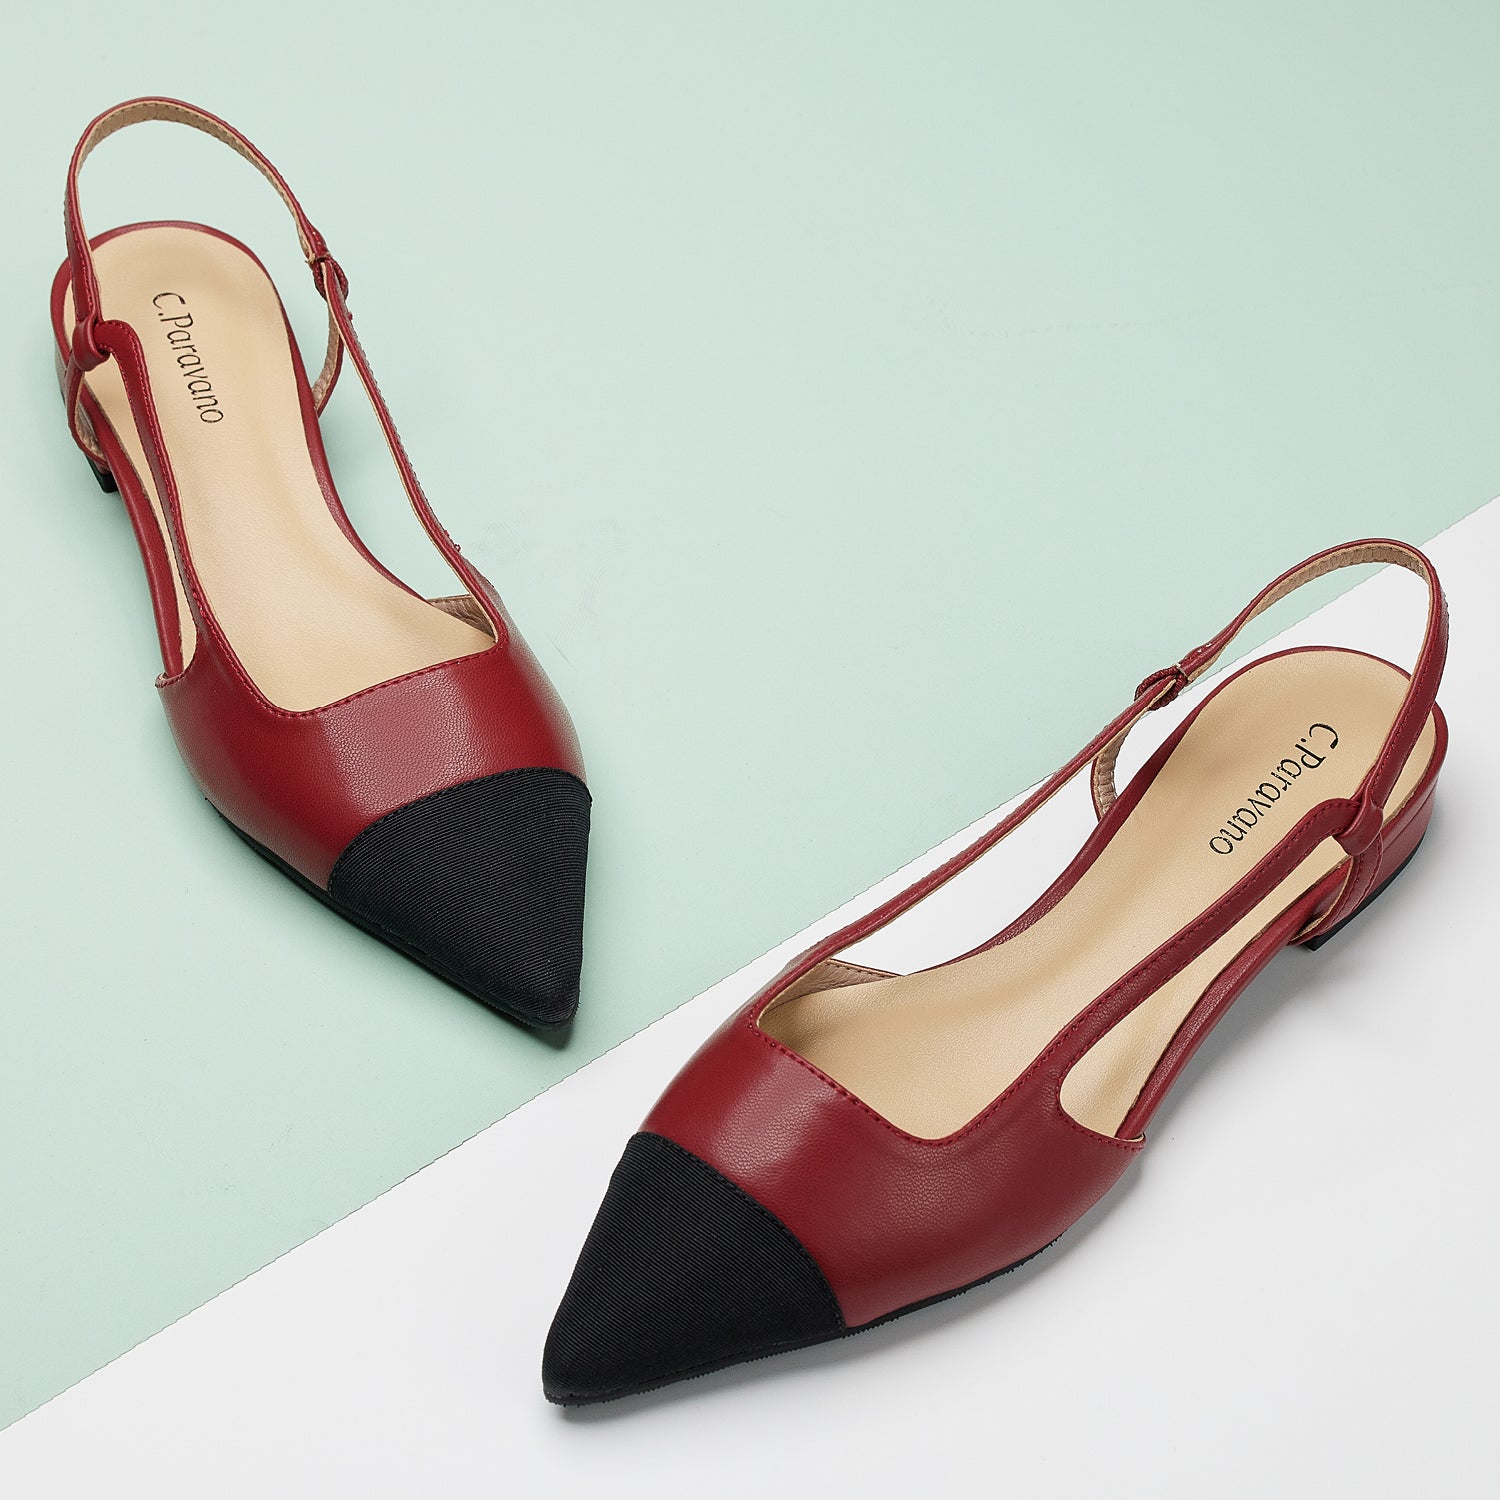 Red Slingback Flats with a pointed toe, adding a touch of modernity to your ensemble in a striking hue.